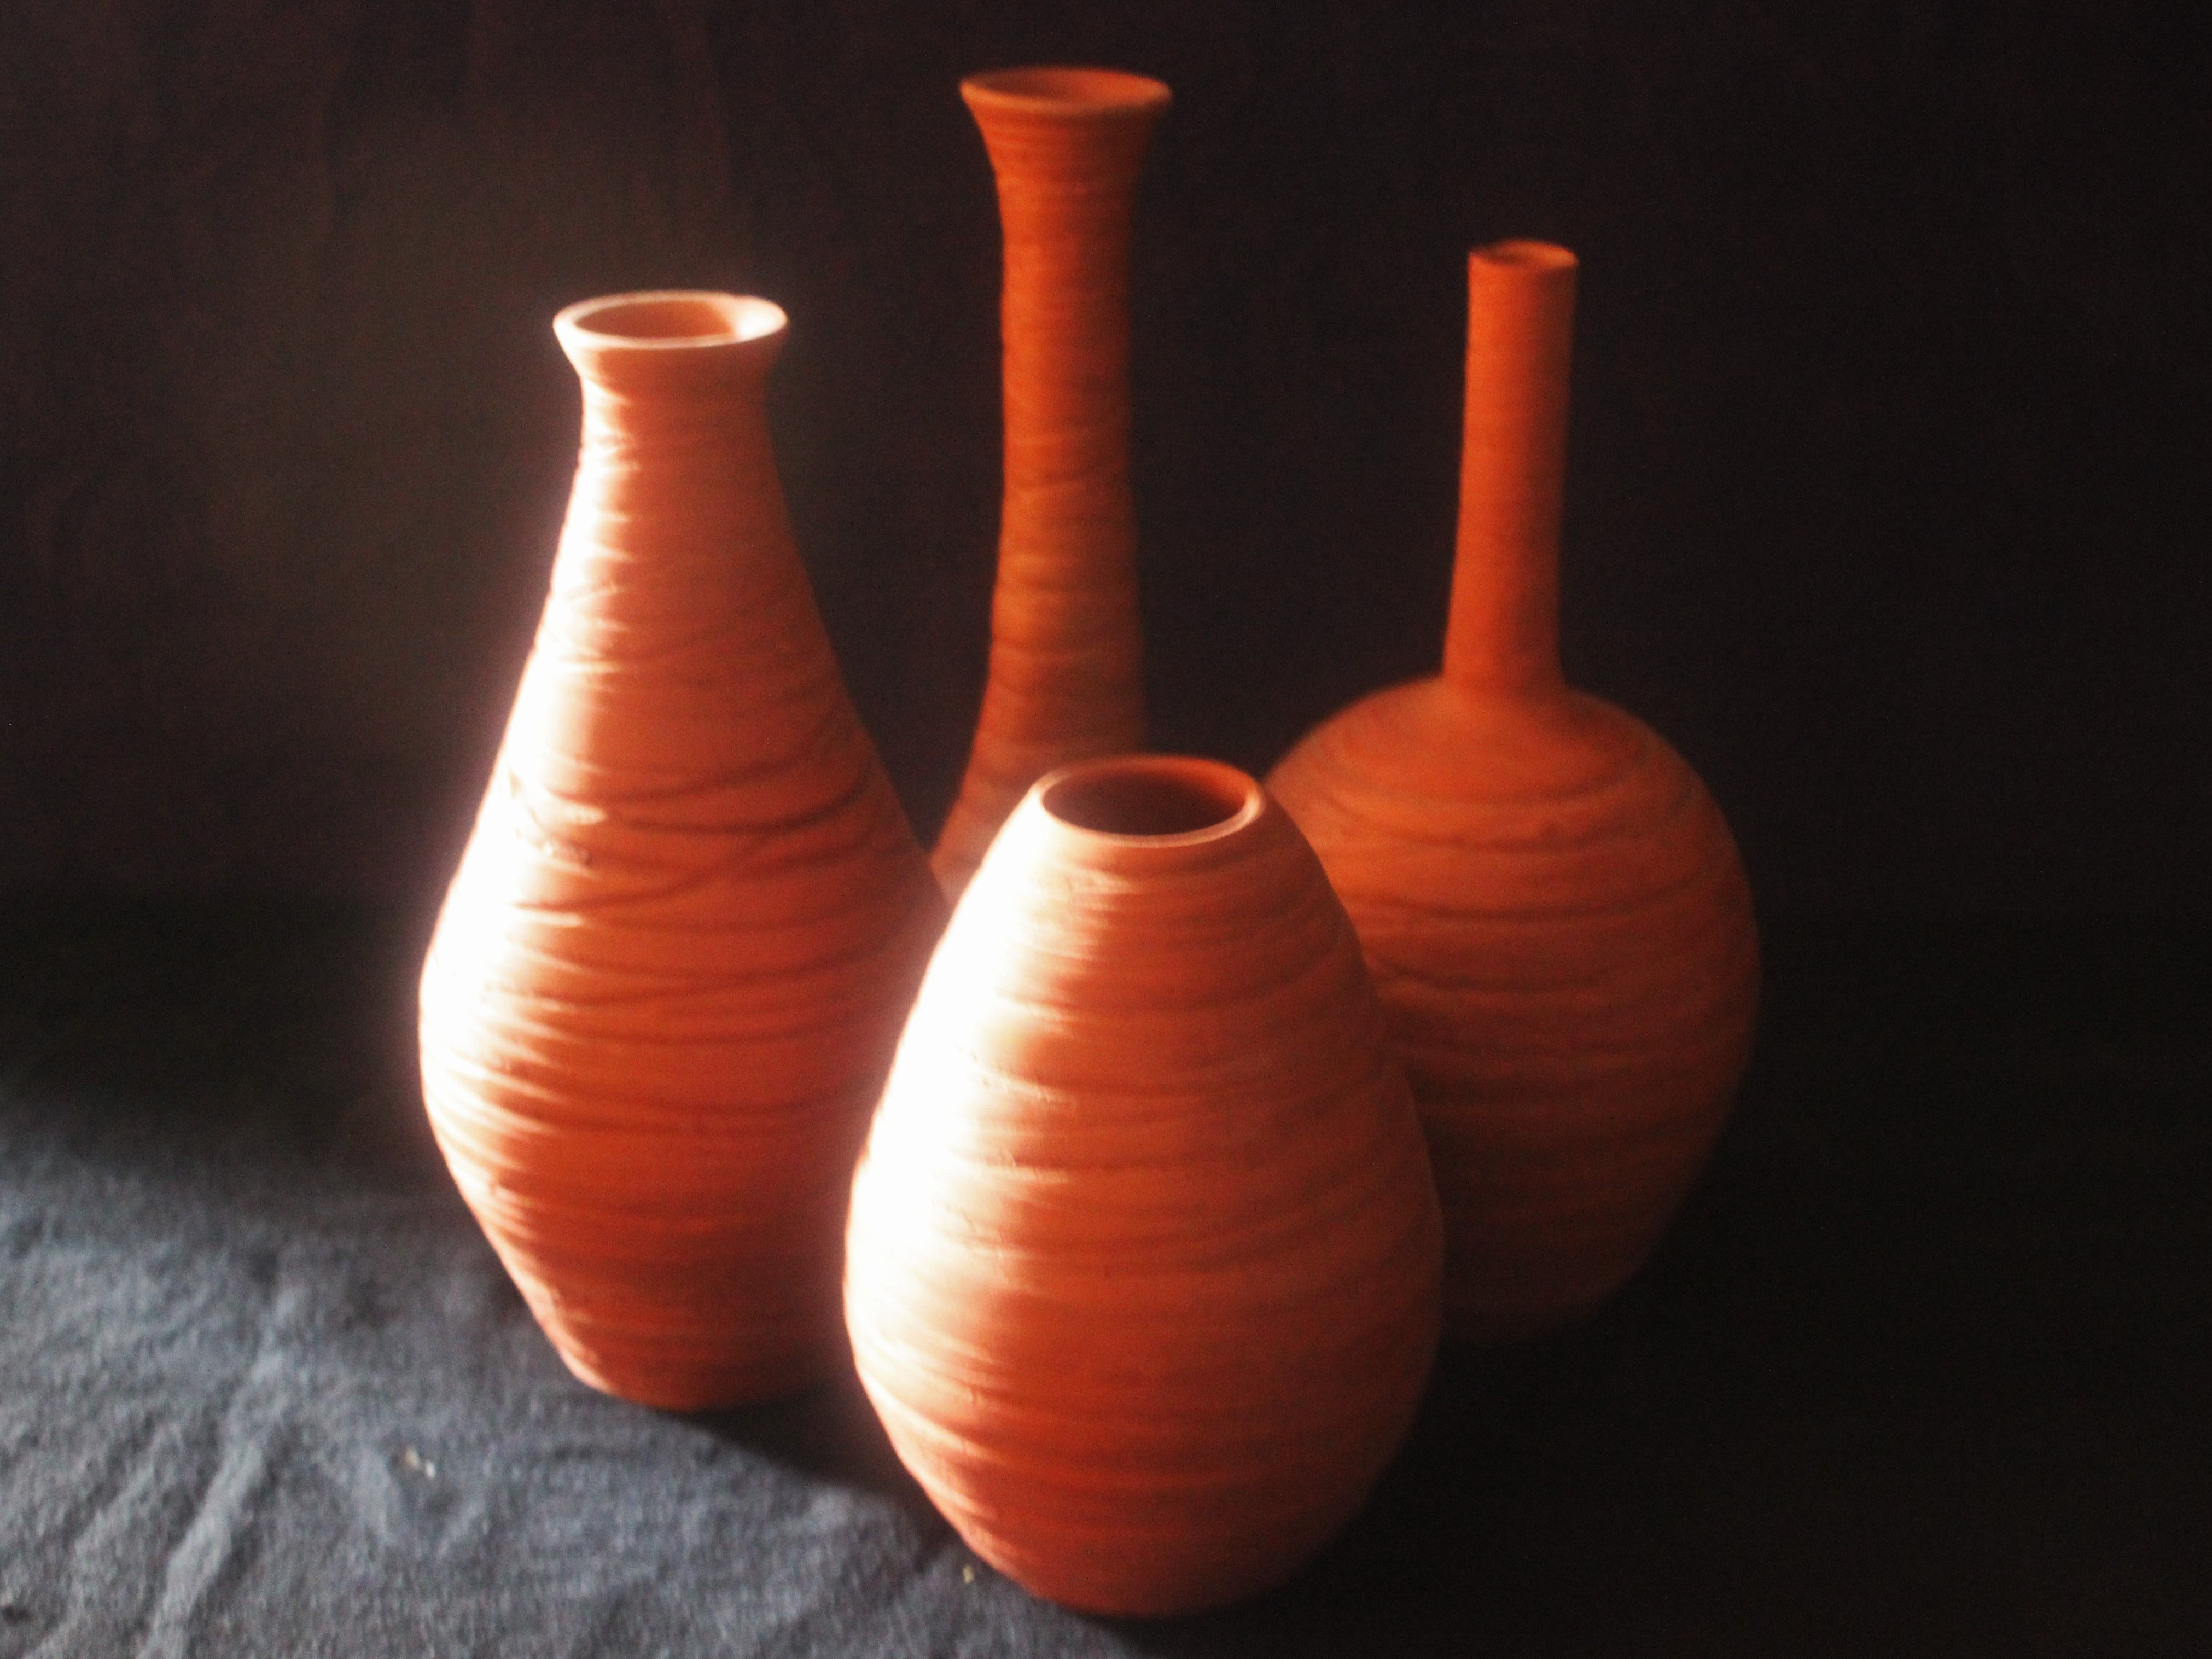 13 Stylish Terracotta Clay Vase 2024 free download terracotta clay vase of terracotta vases set of 4 pcs by artesania the clay studio price inside terracotta vases set of 4 pcs by artesania the clay studio price rs 3250 plus shipping